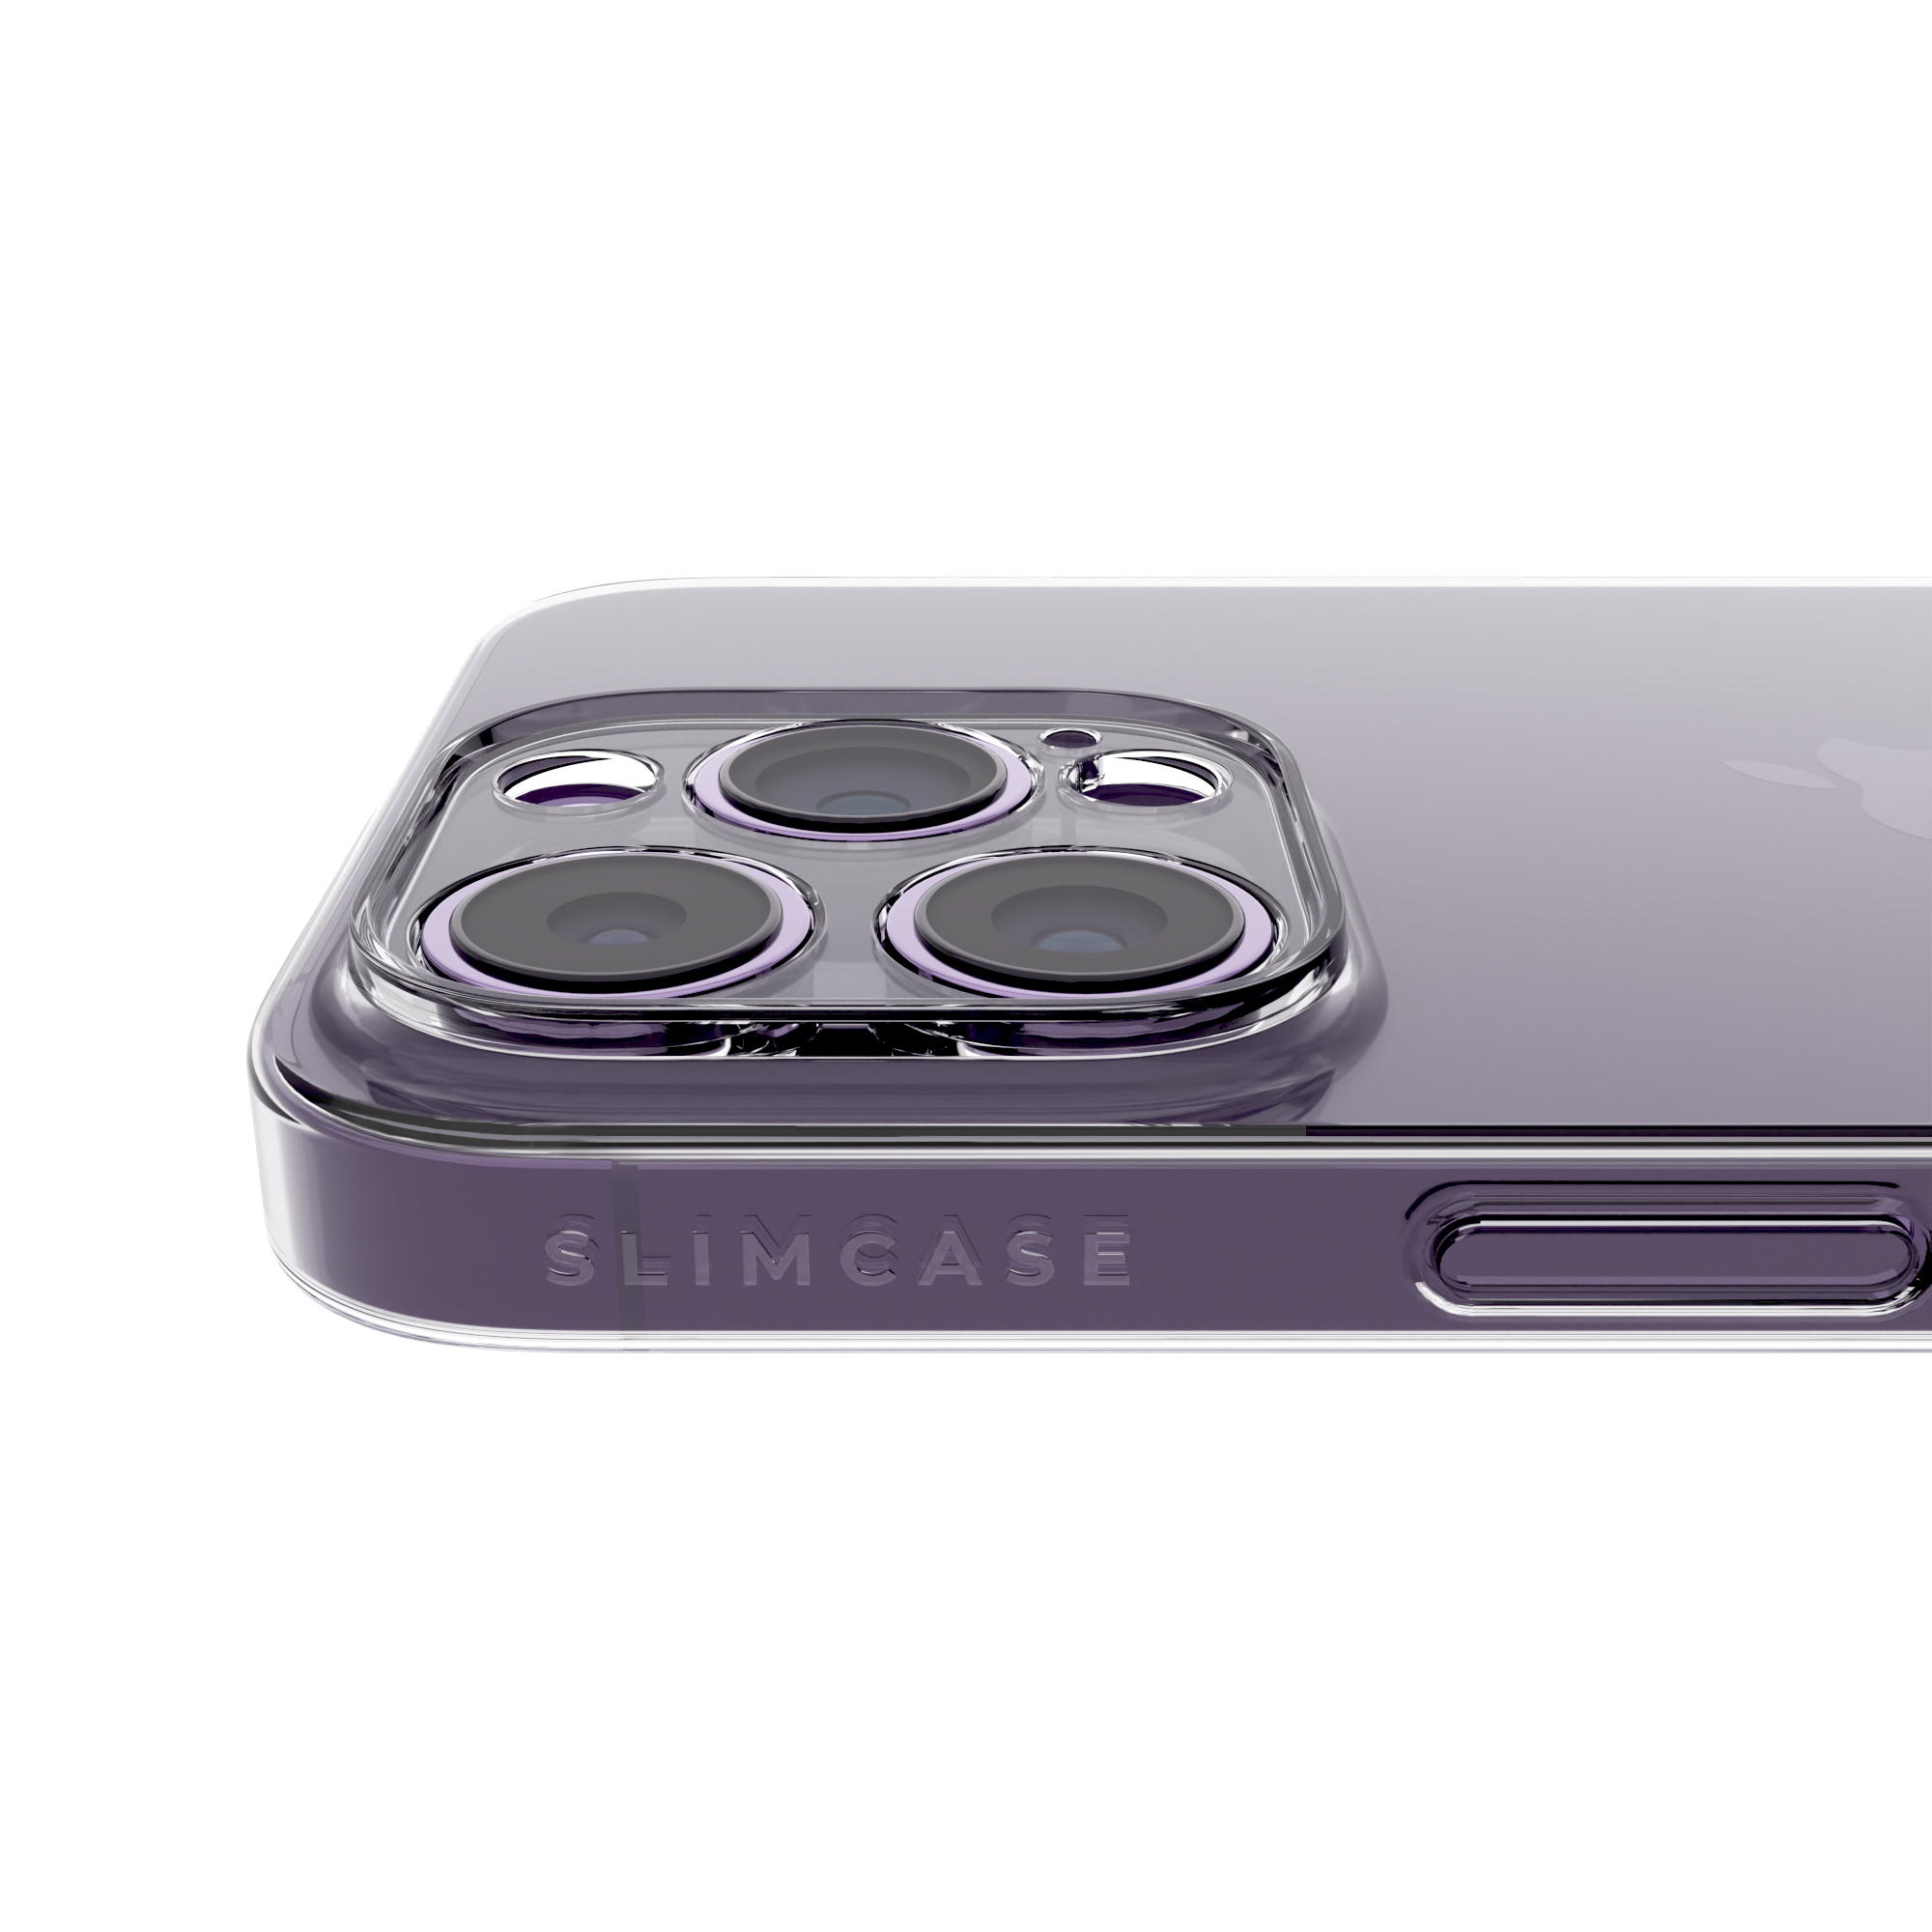 Slimcase for iPhone 14 Pro Max